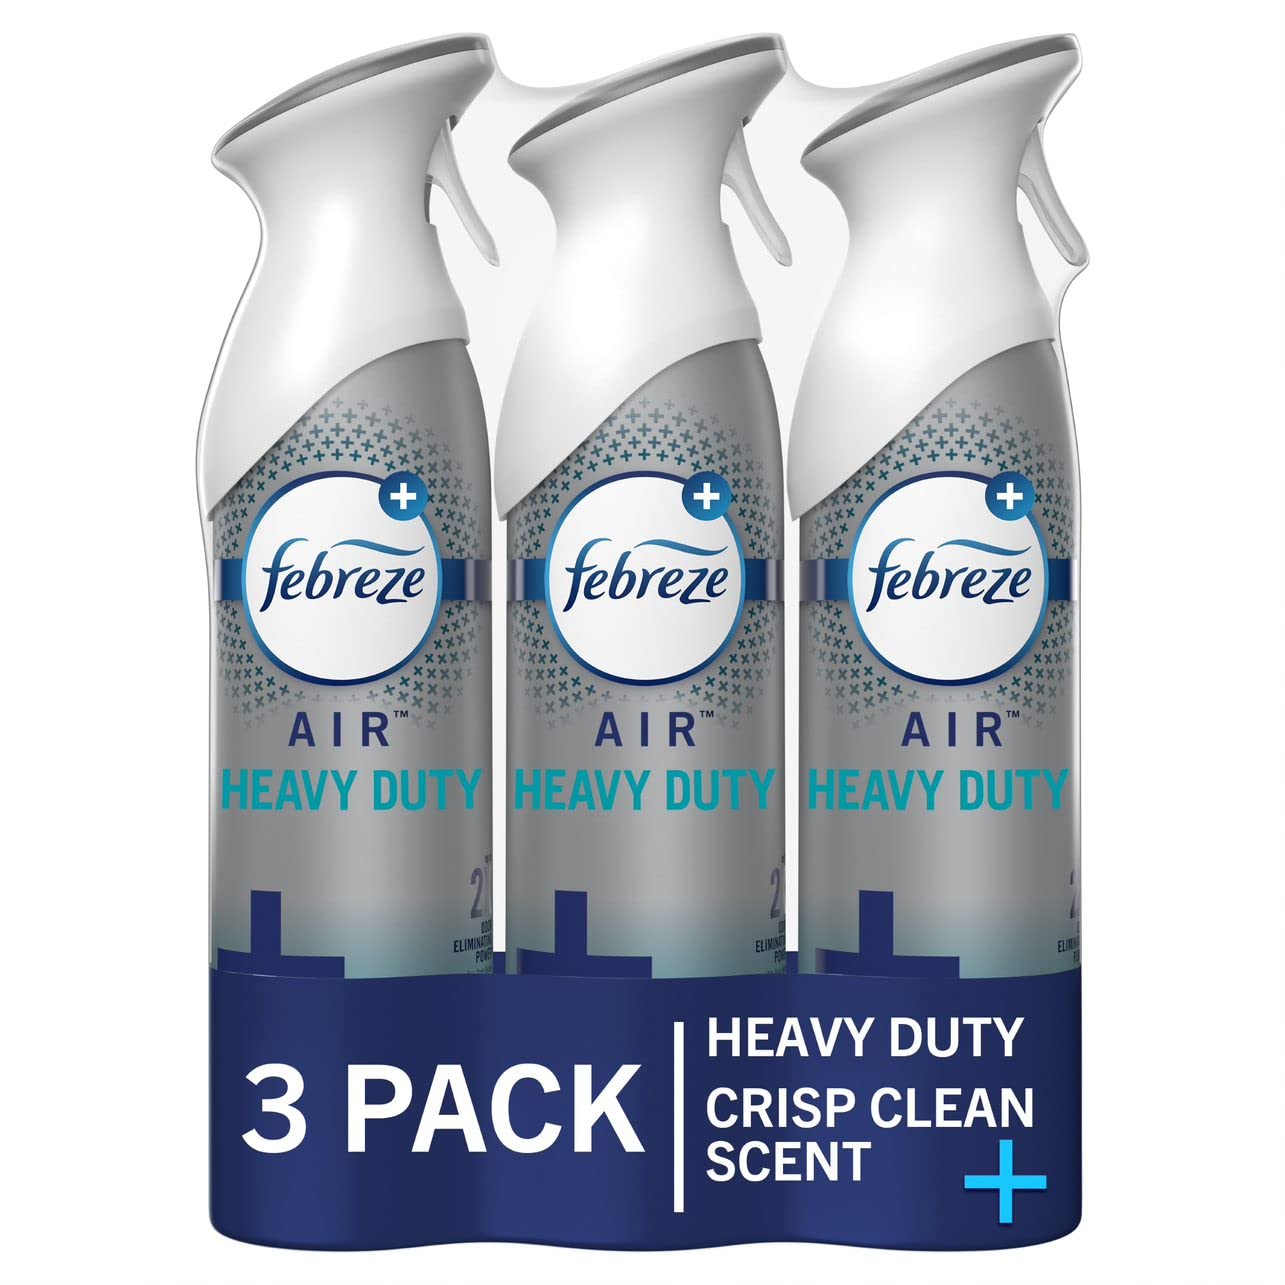 3-Pack 8.8-Ounce Febreze Heavy Duty Odor-Fighting Air Freshener (Crisp Clean) $8.40 w/ S&S + Free Shipping w/ Prime or on $35+